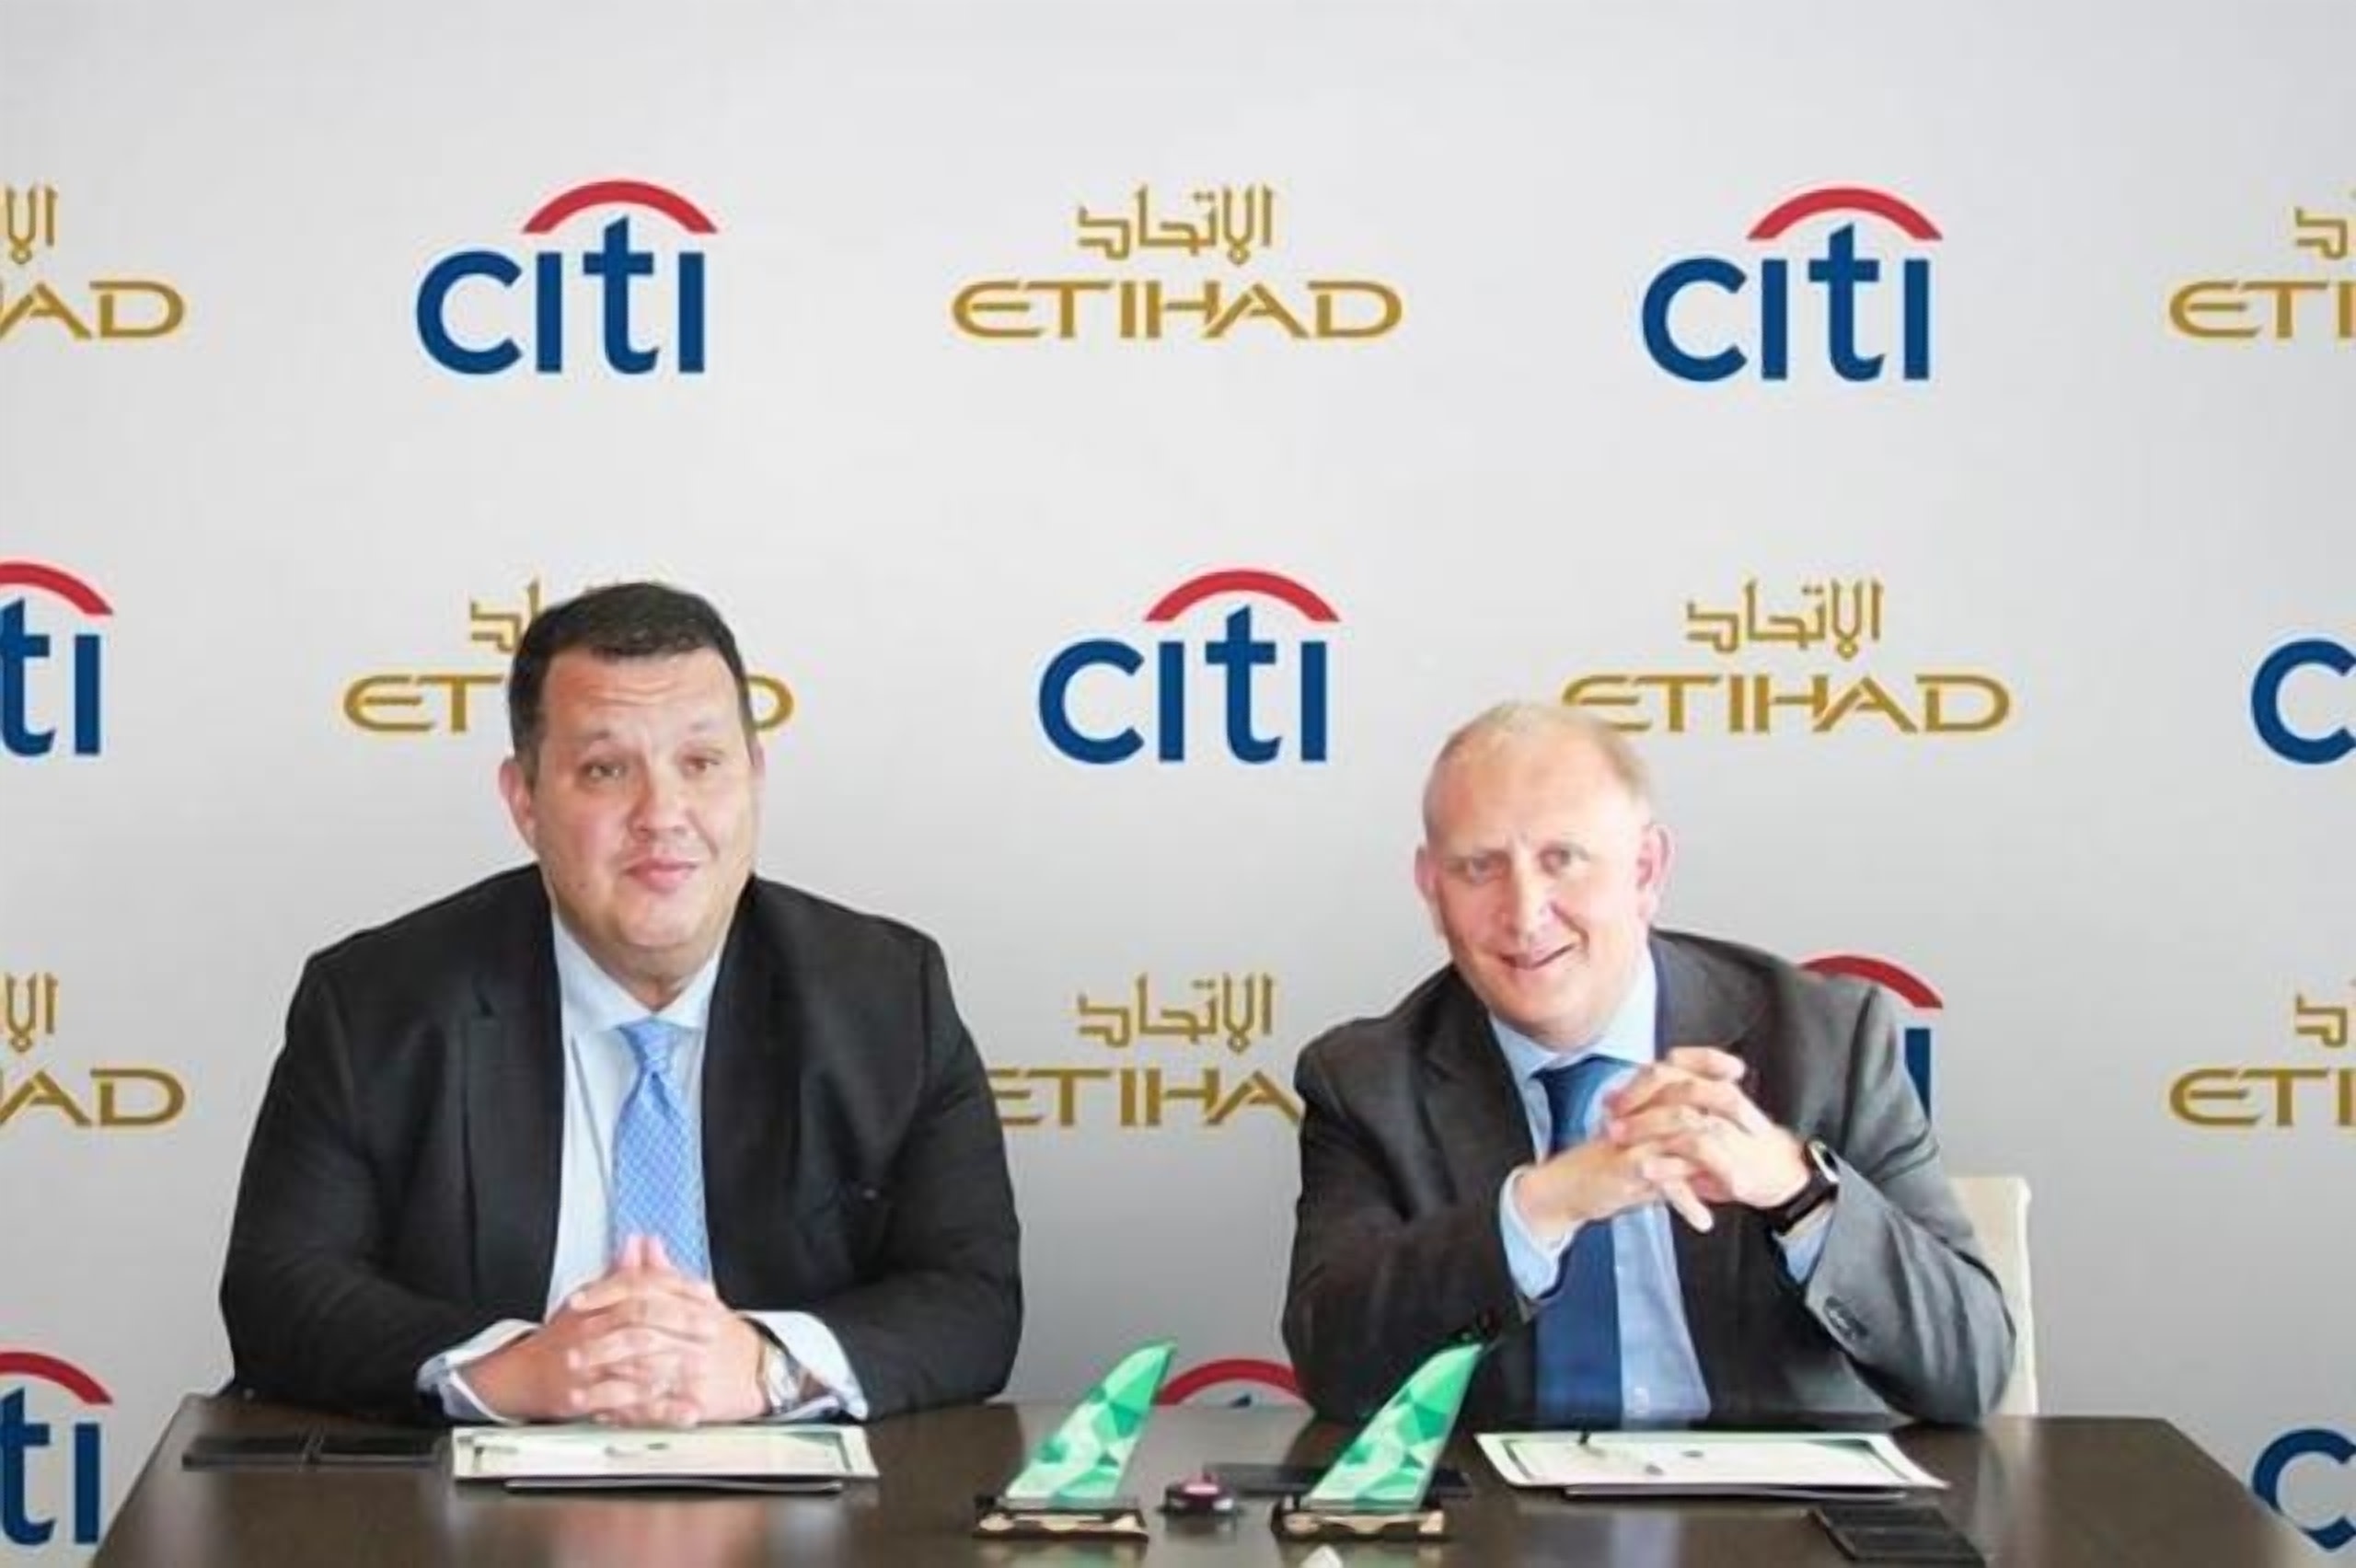 Citi and Etihad Sign Agreement for First Sustainable Deposit Solution